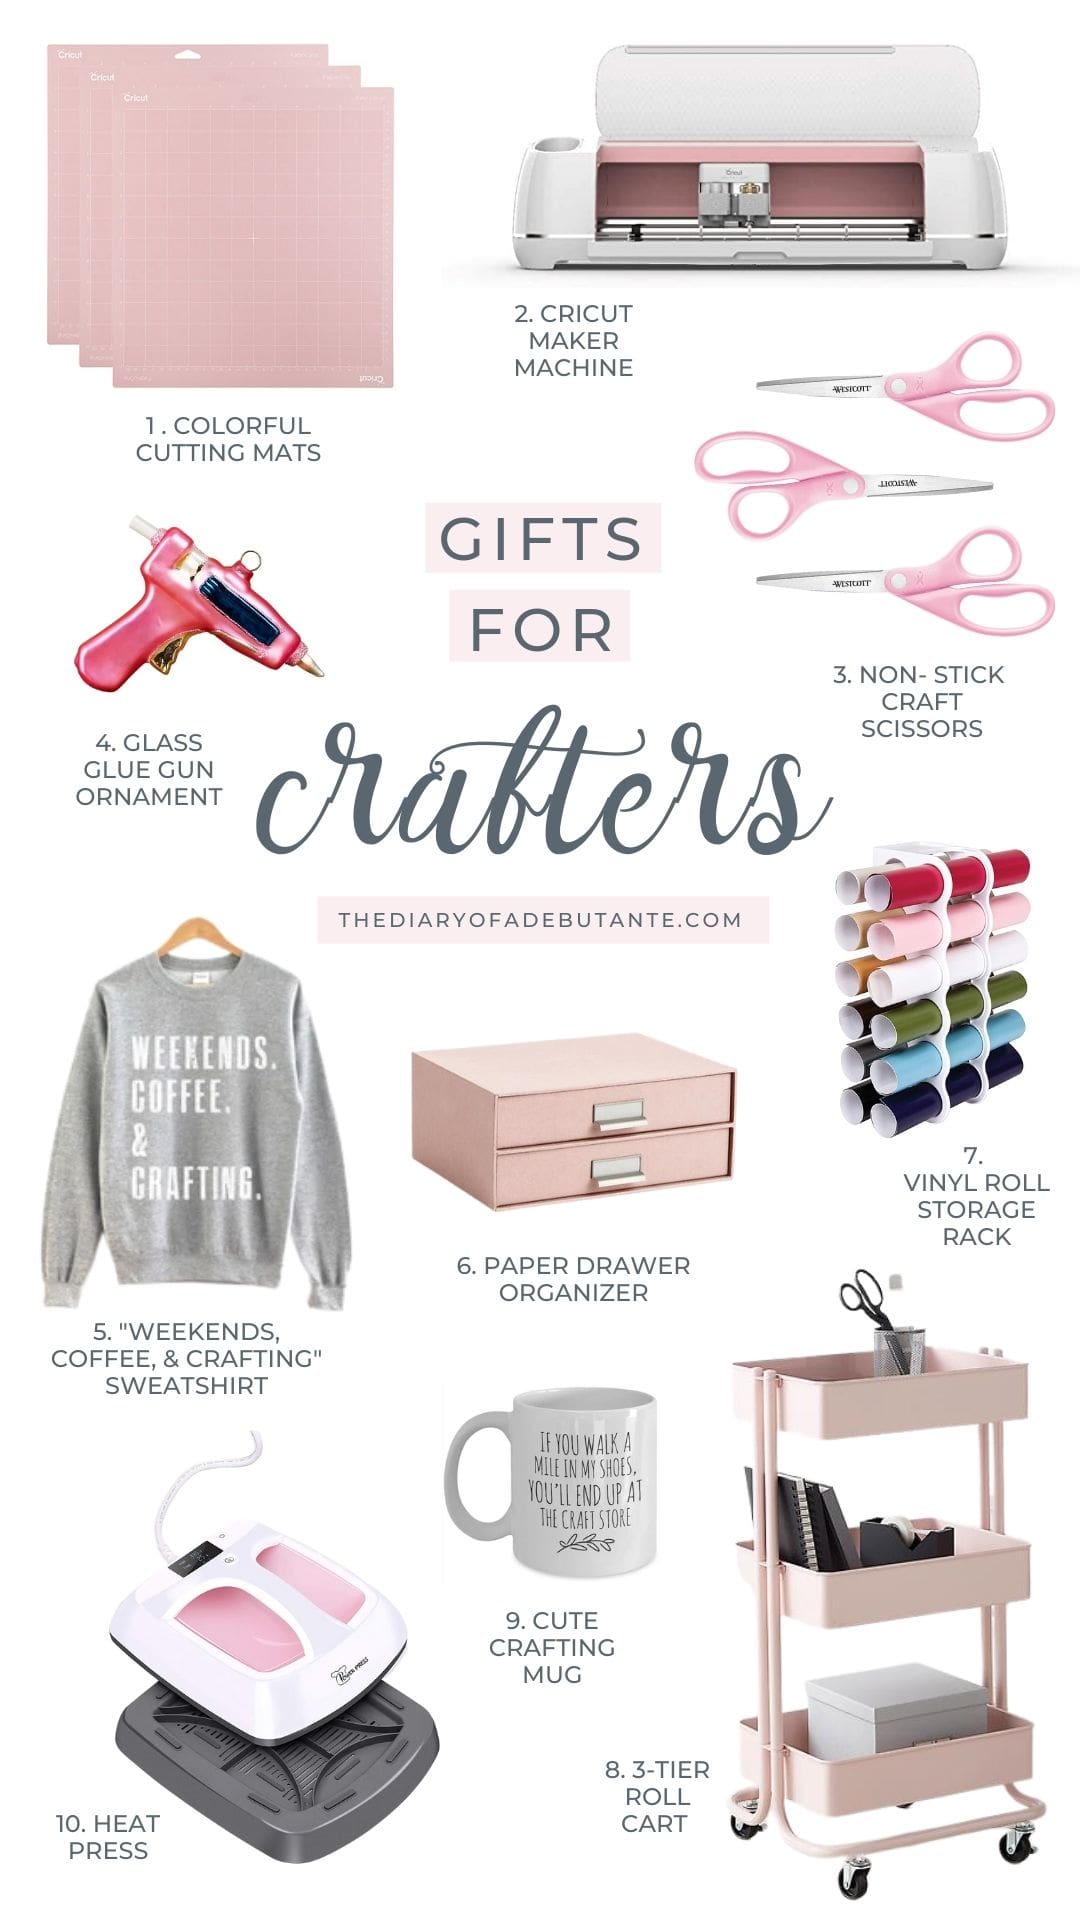 Best gifts for crafters curated by DIY blogger Stephanie Ziajka on Diary of a Debutante